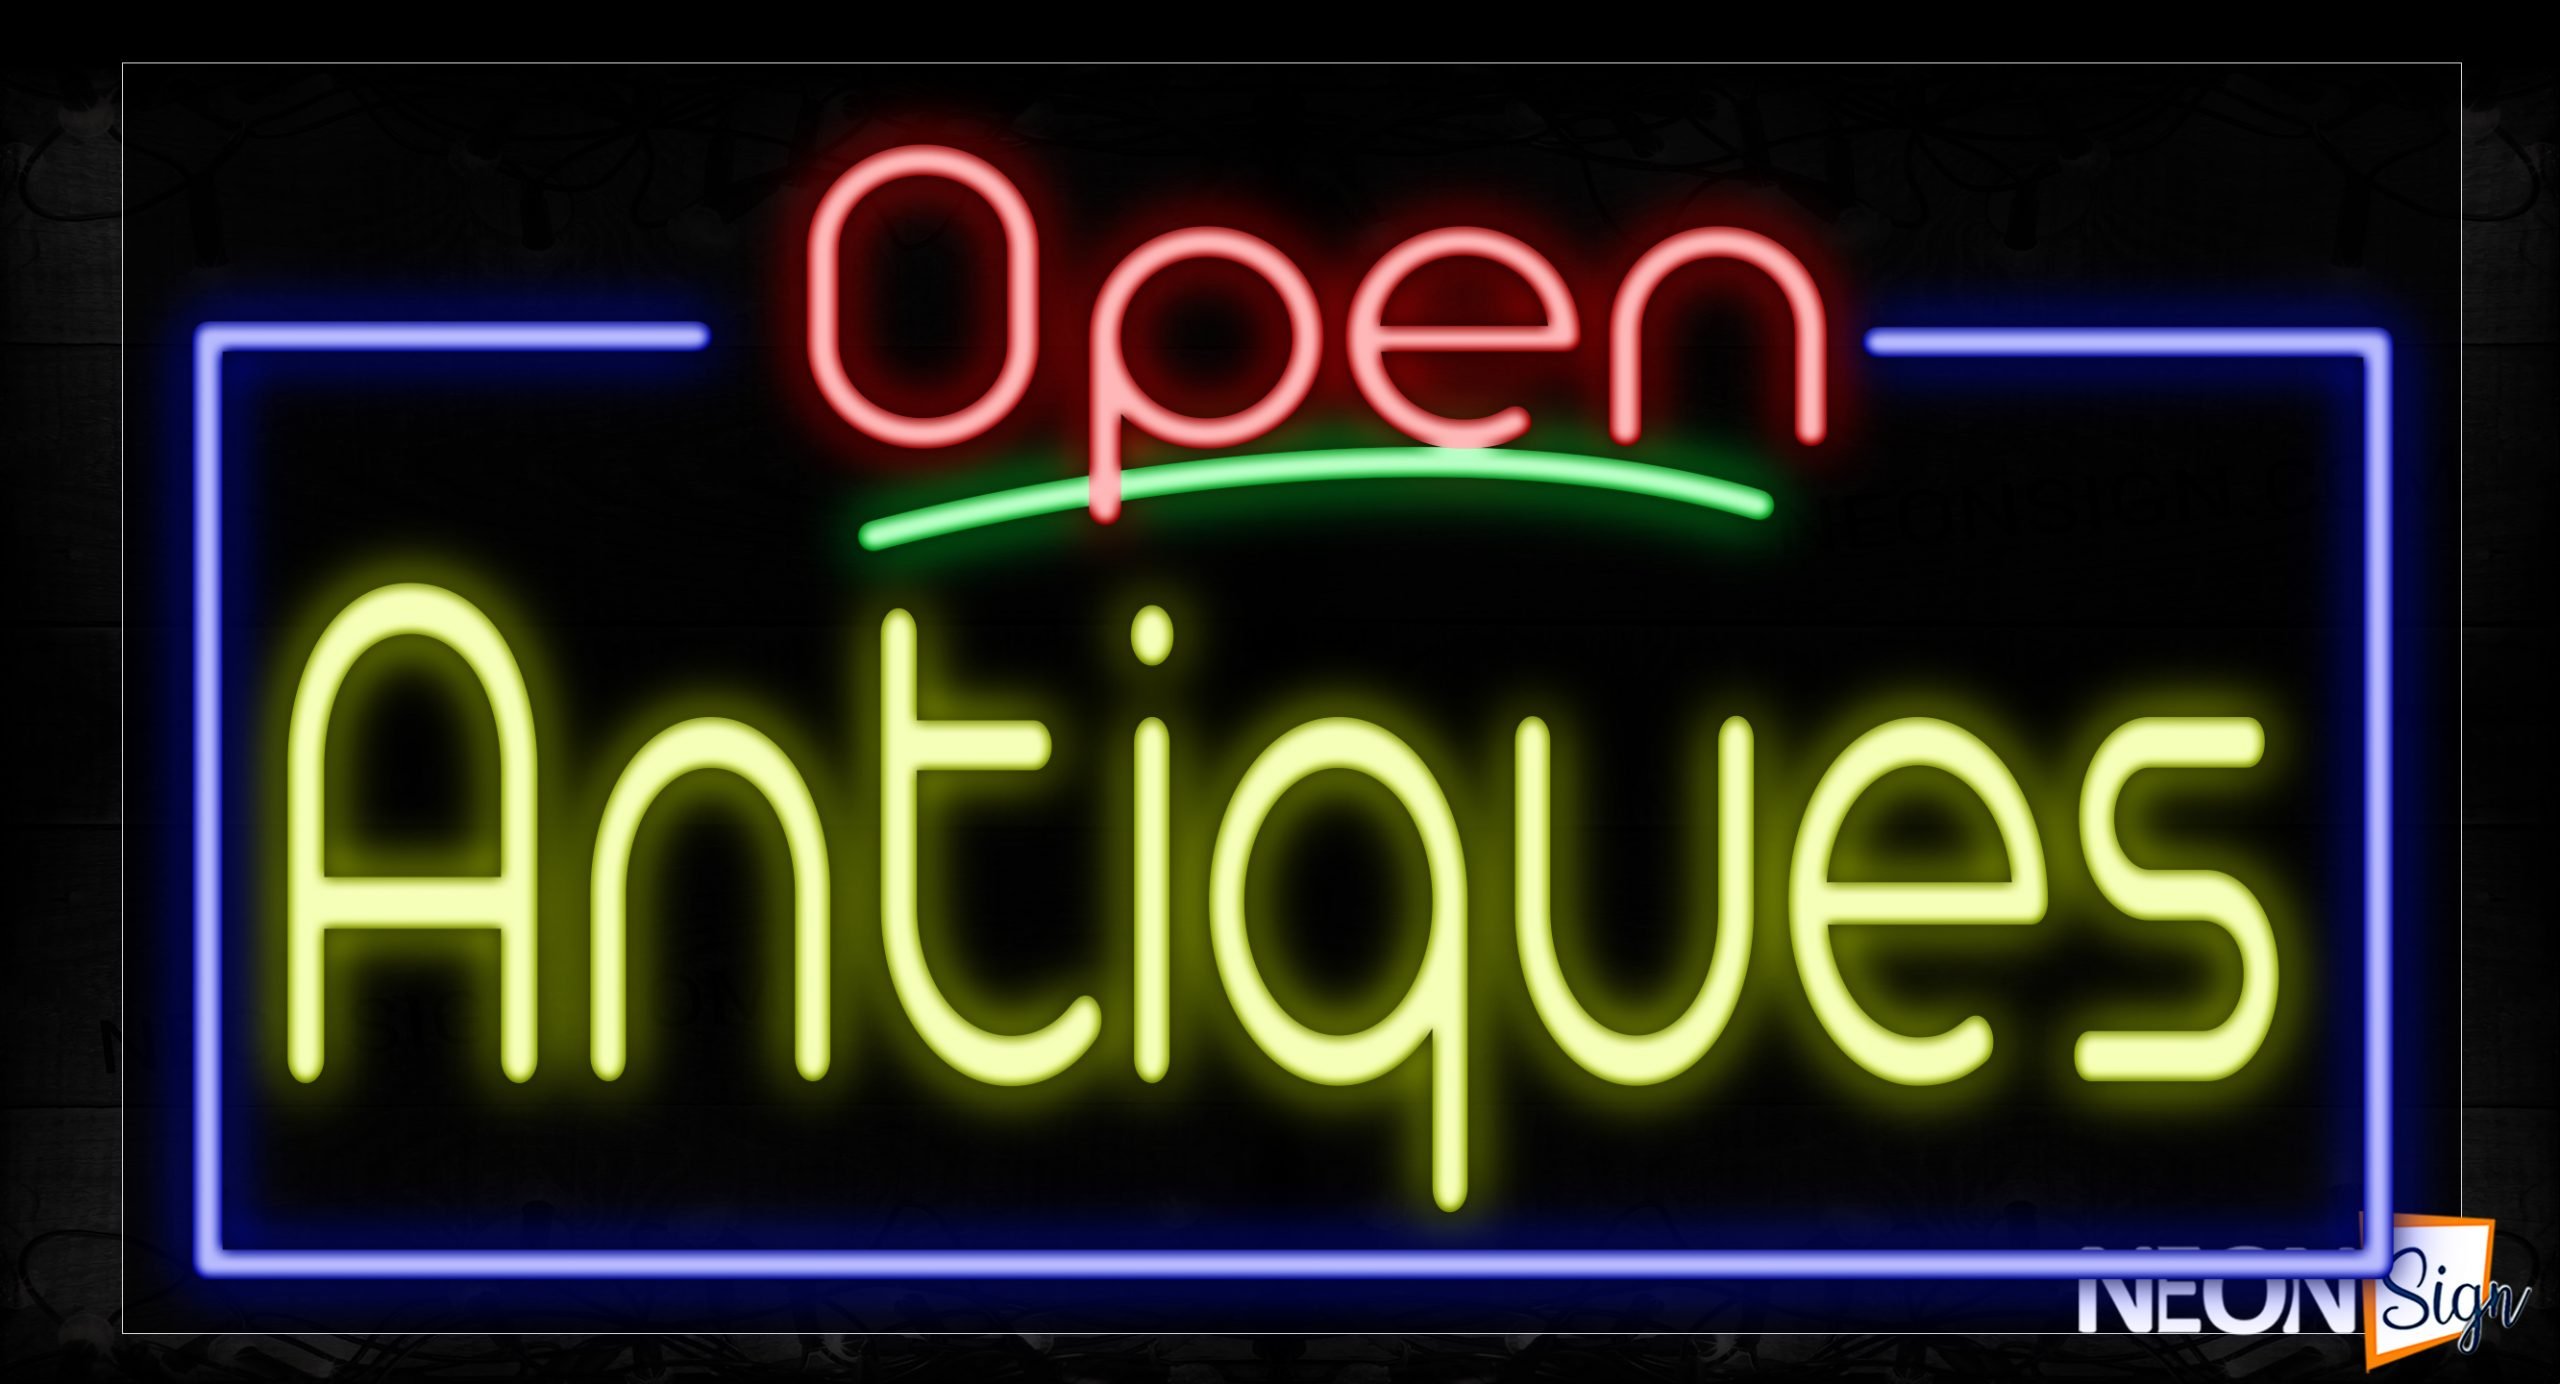 Image of 15446 Open Antiques With Blue Border And Green Line Neon Sign_20x37 Contoured Black Backing